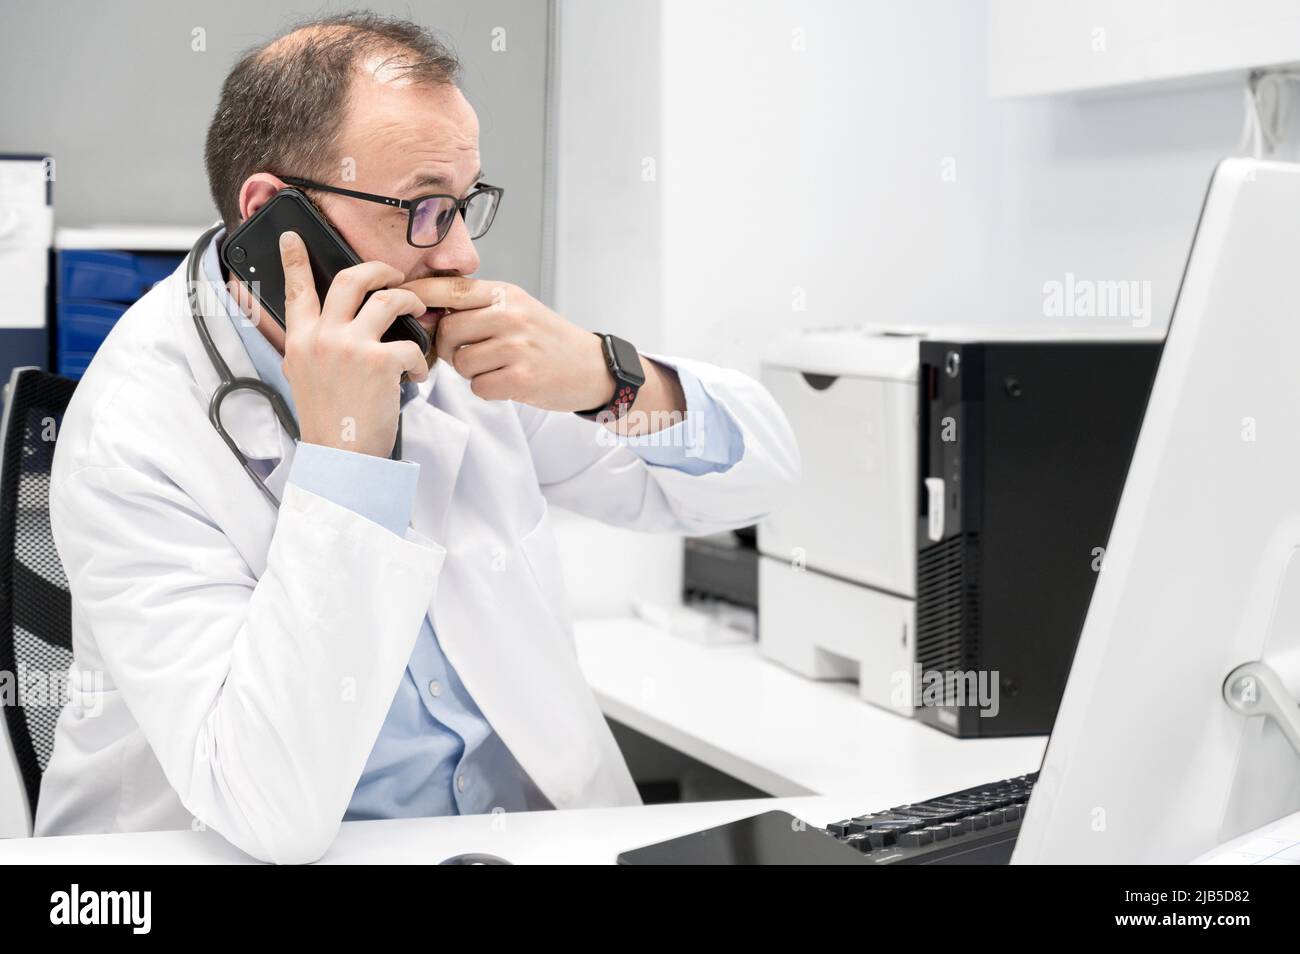 Doctor looking worried a desktop computer screen,, checking the results of a medical examination. High quality photography. Stock Photo